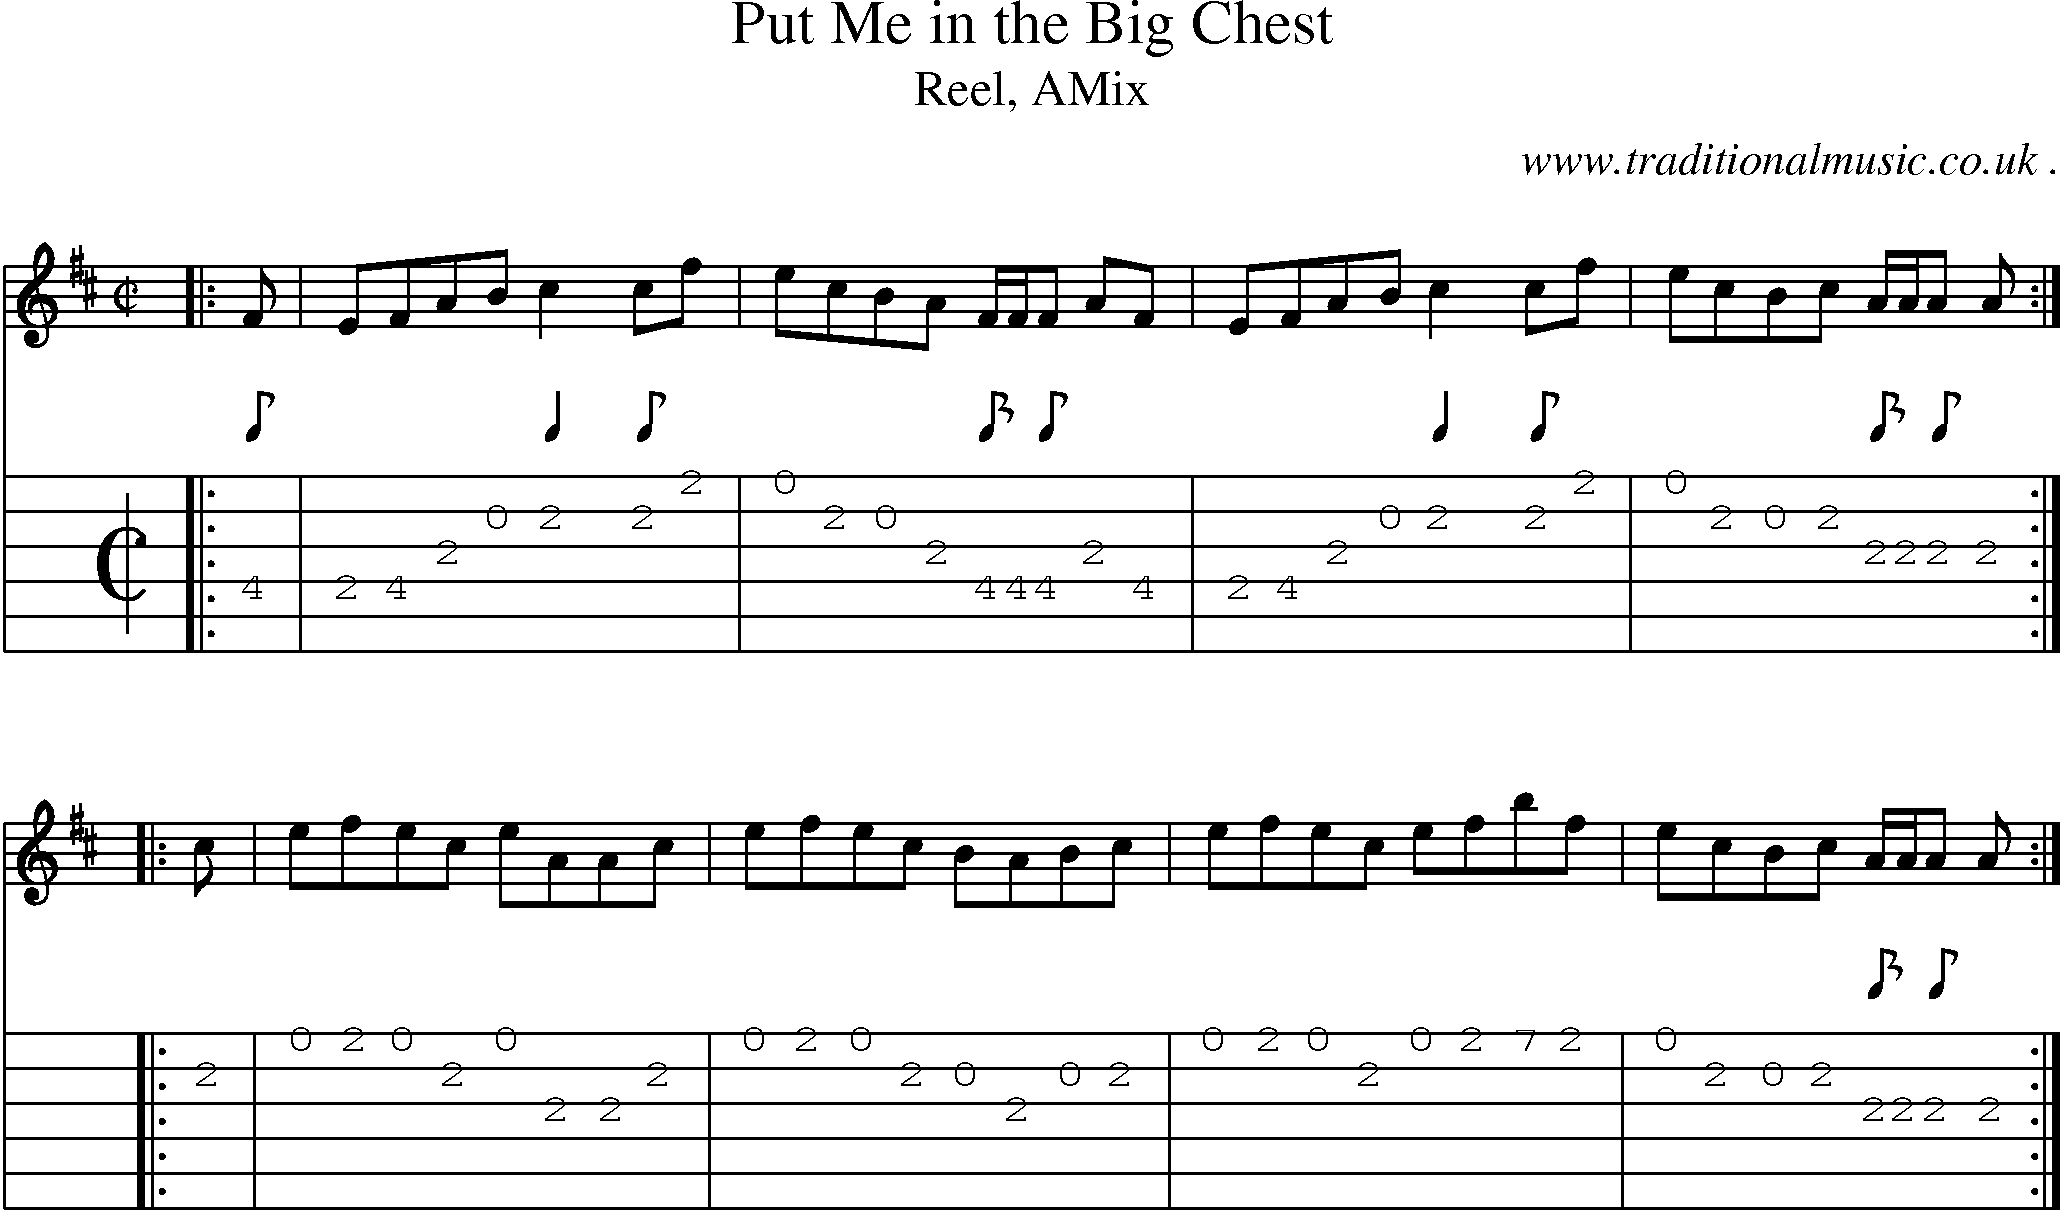 Sheet-music  score, Chords and Guitar Tabs for Put Me In The Big Chest